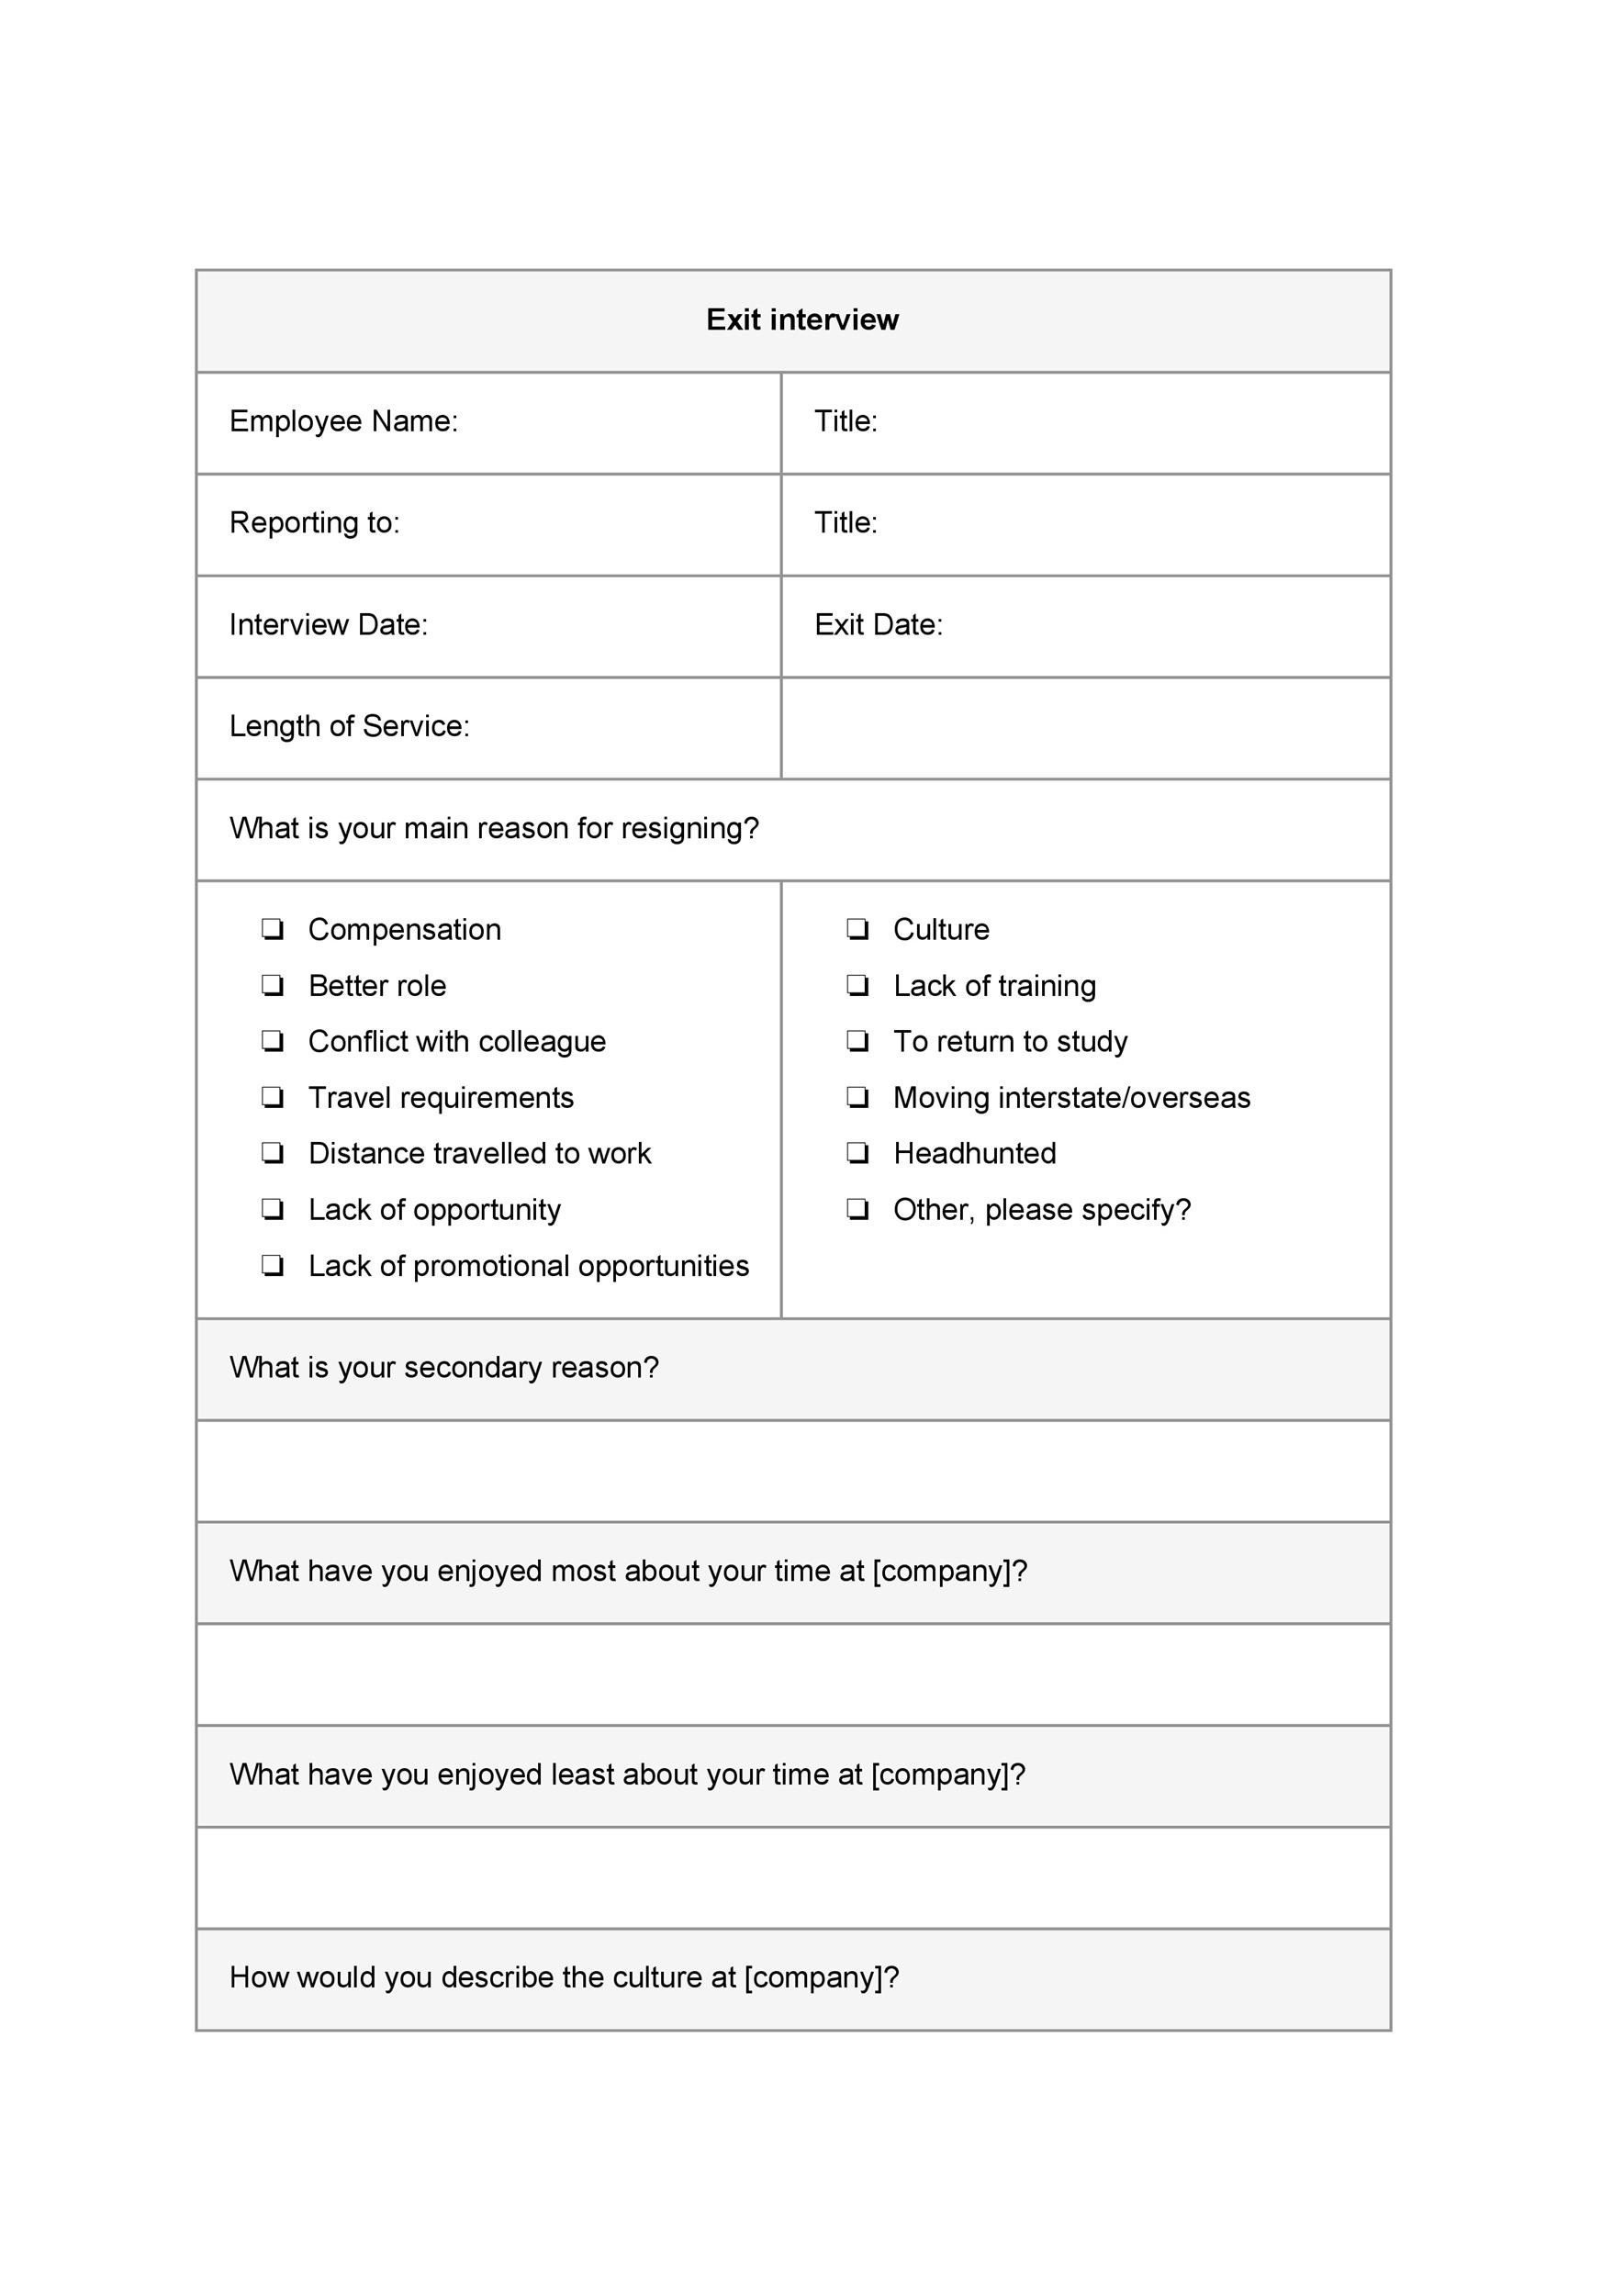 Free exit interview template 14